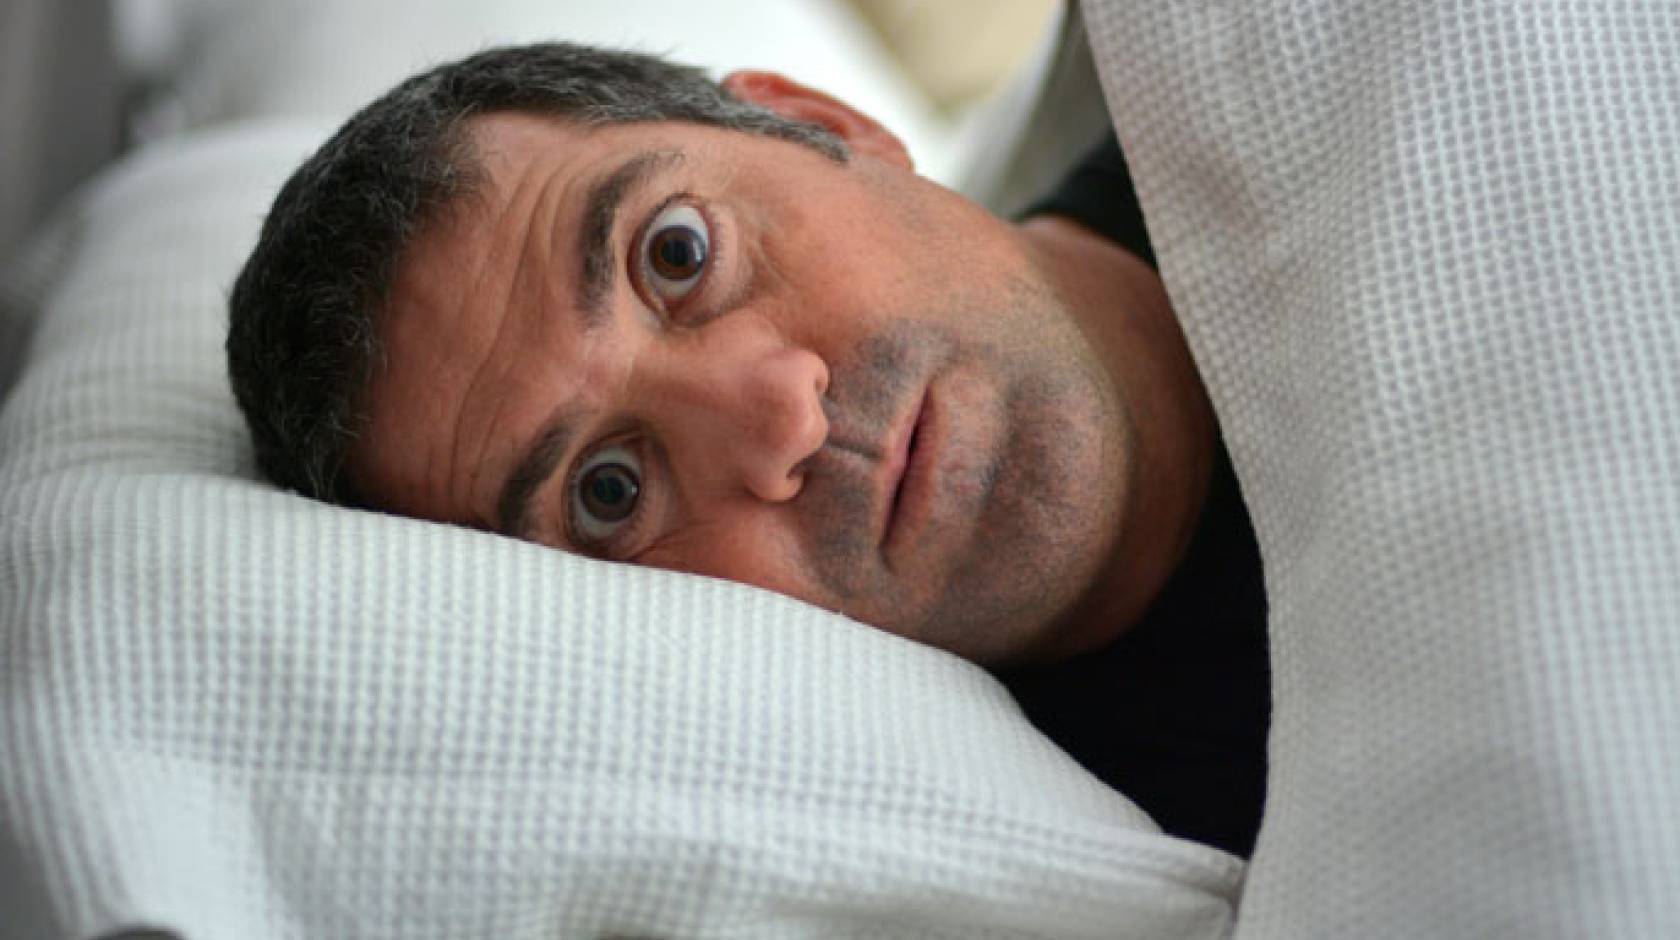 Man in bed looking surprised and scared